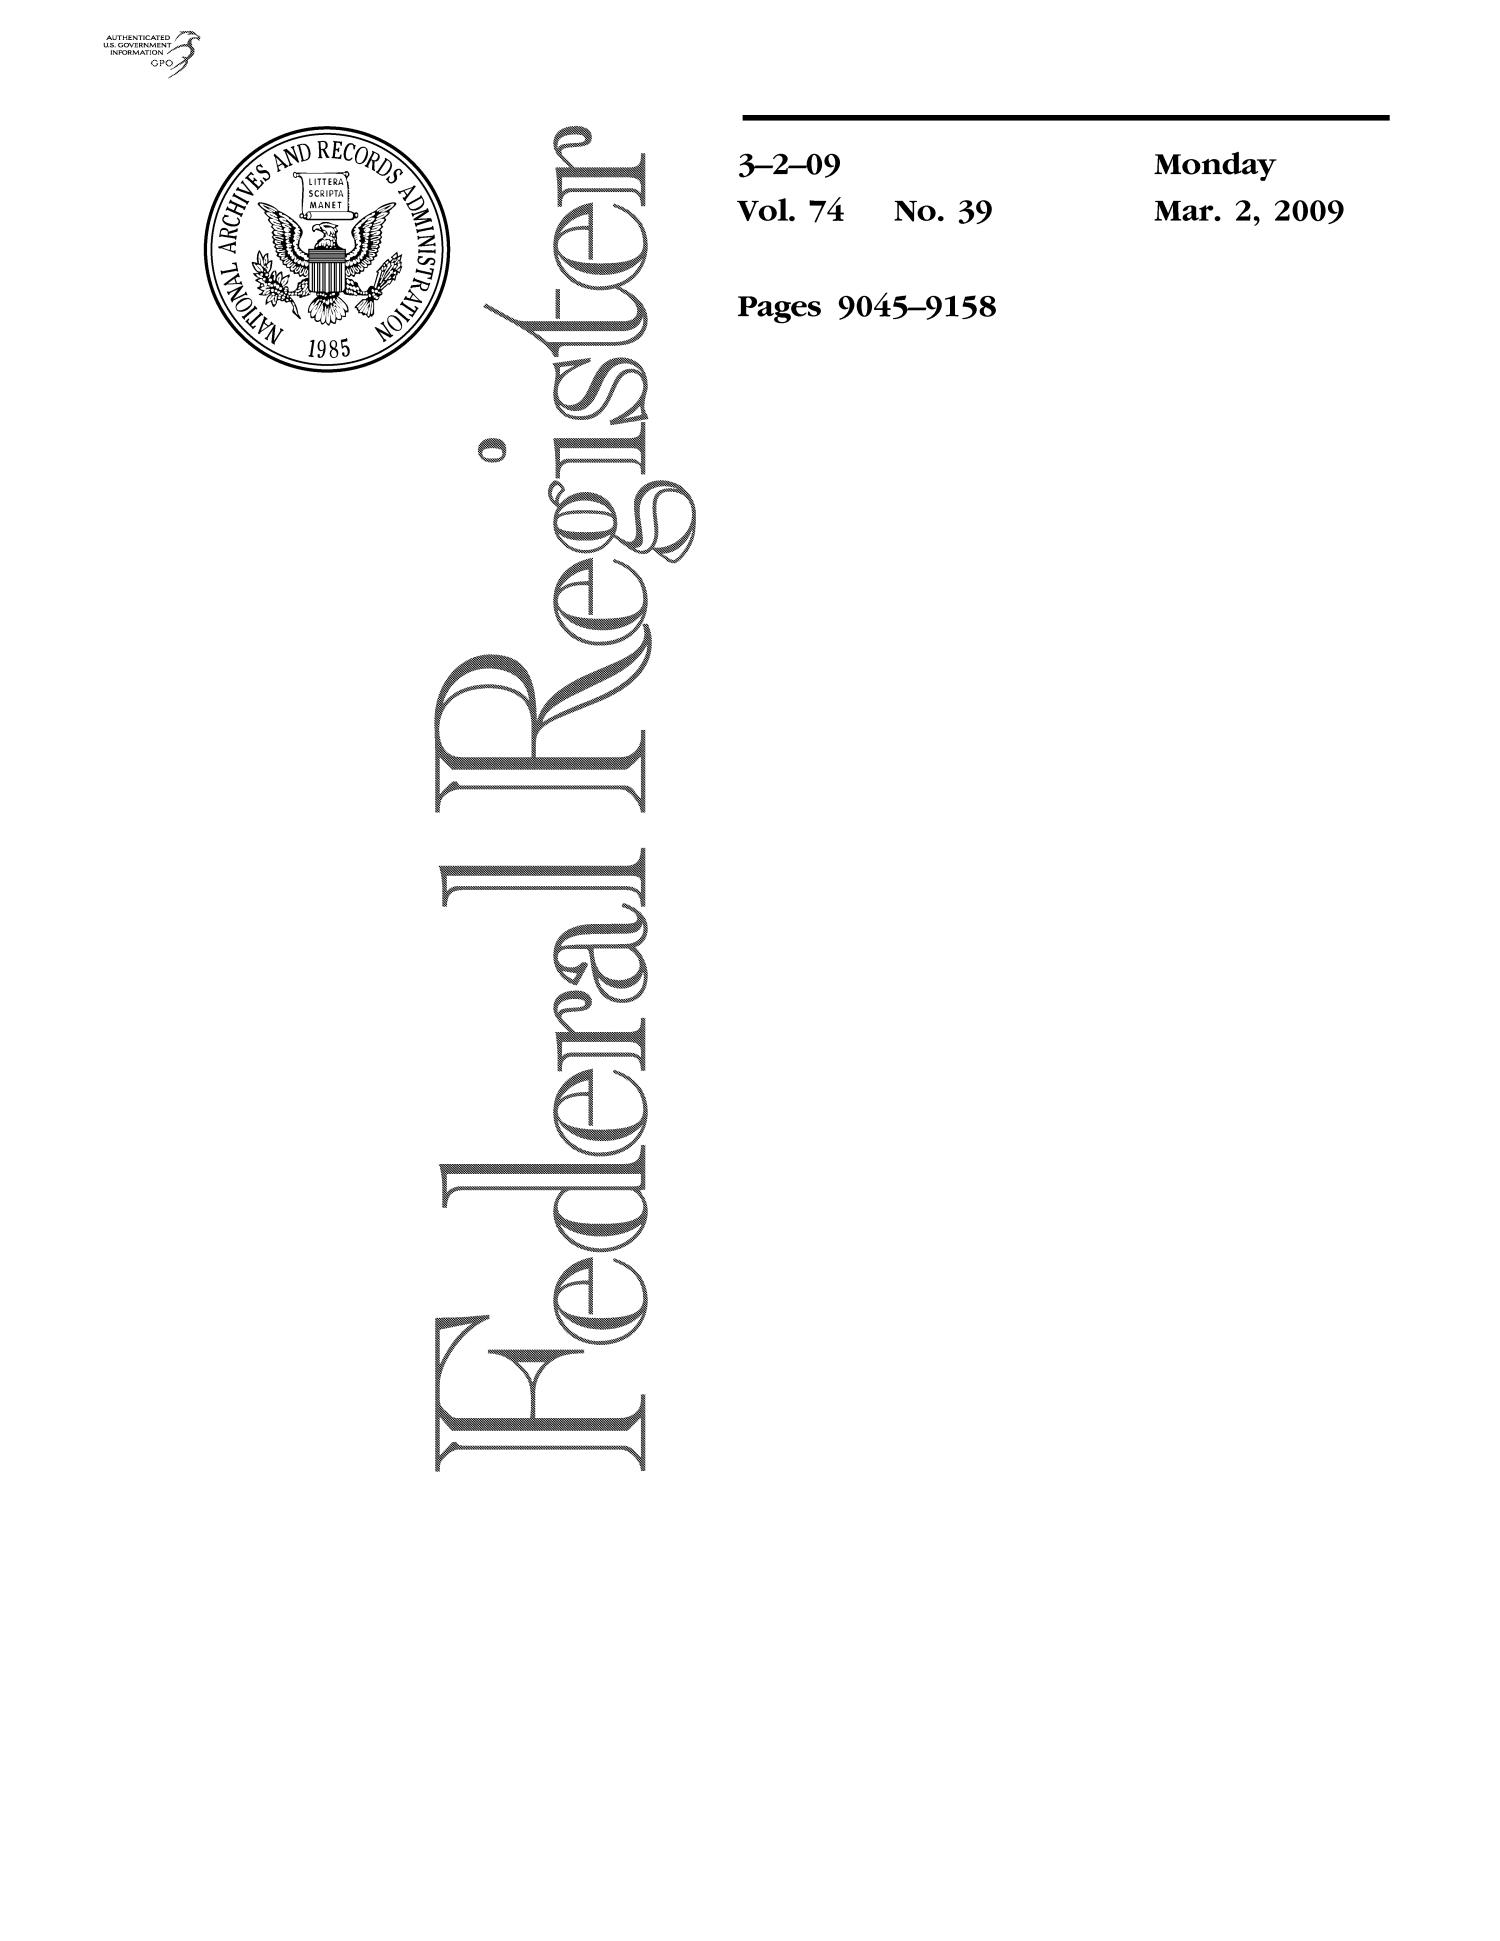 Federal Register, Volume 74, Number 39, March 2, 2009, Pages 9045-9158
                                                
                                                    Title Page
                                                